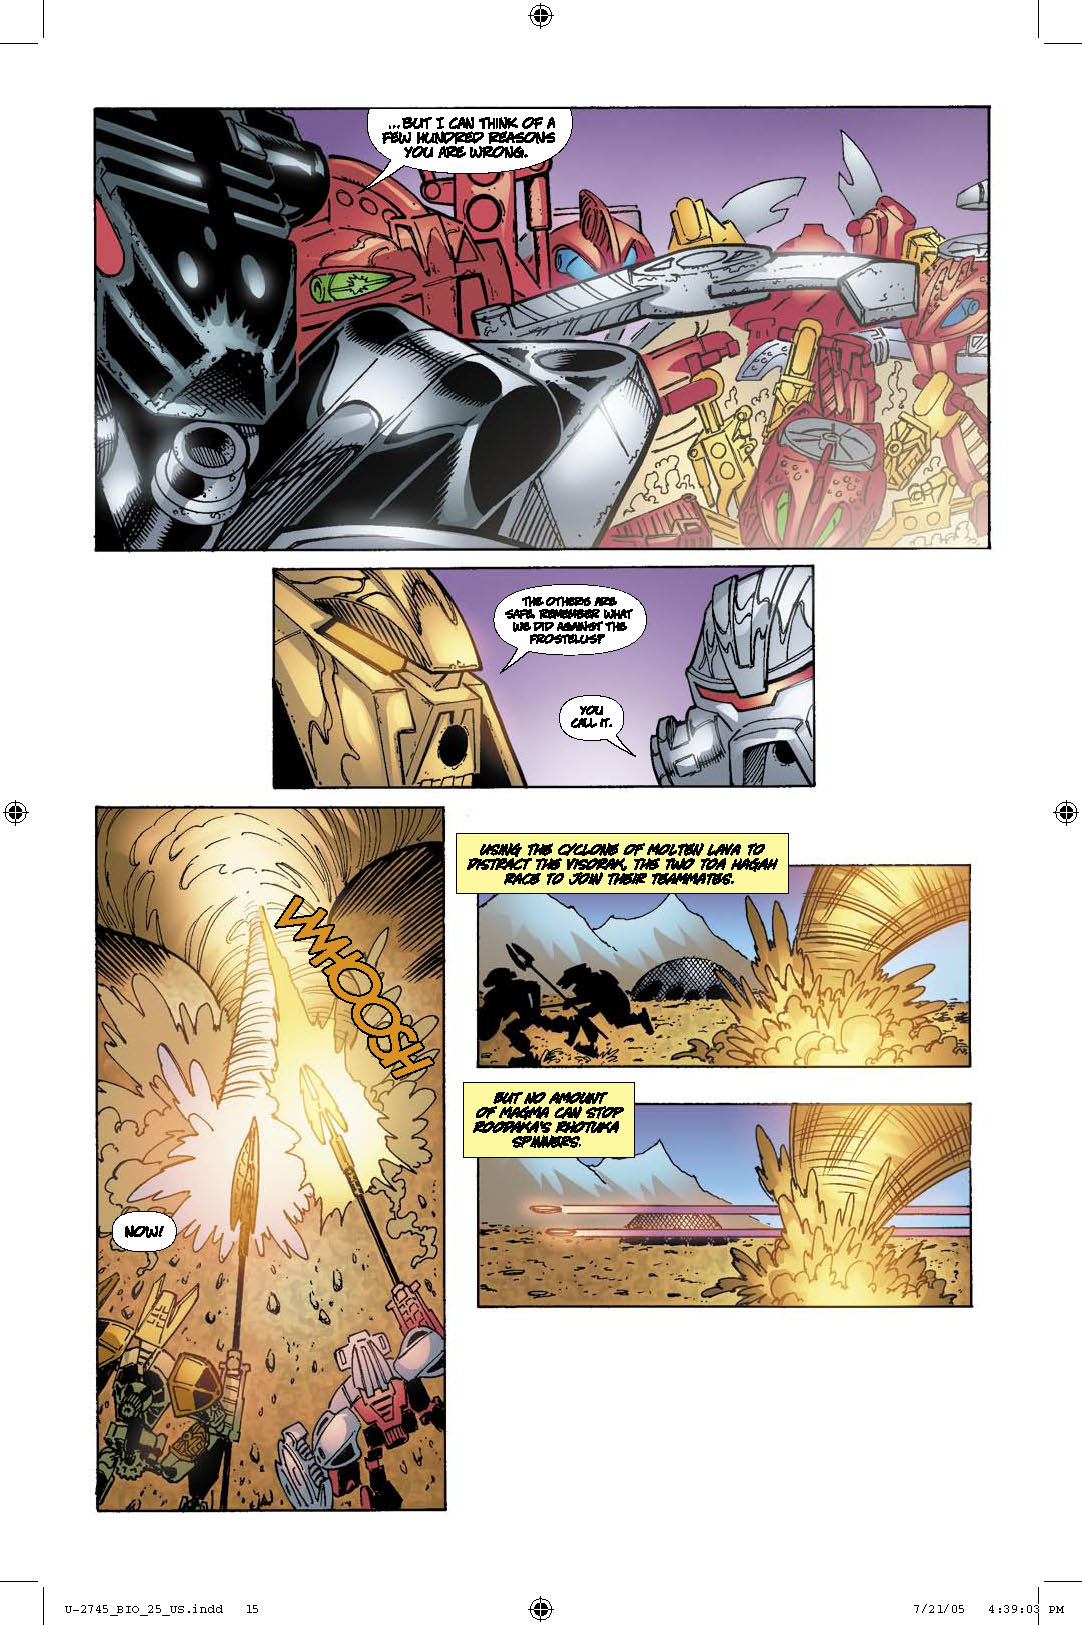 Read online Bionicle comic -  Issue #25 - 15